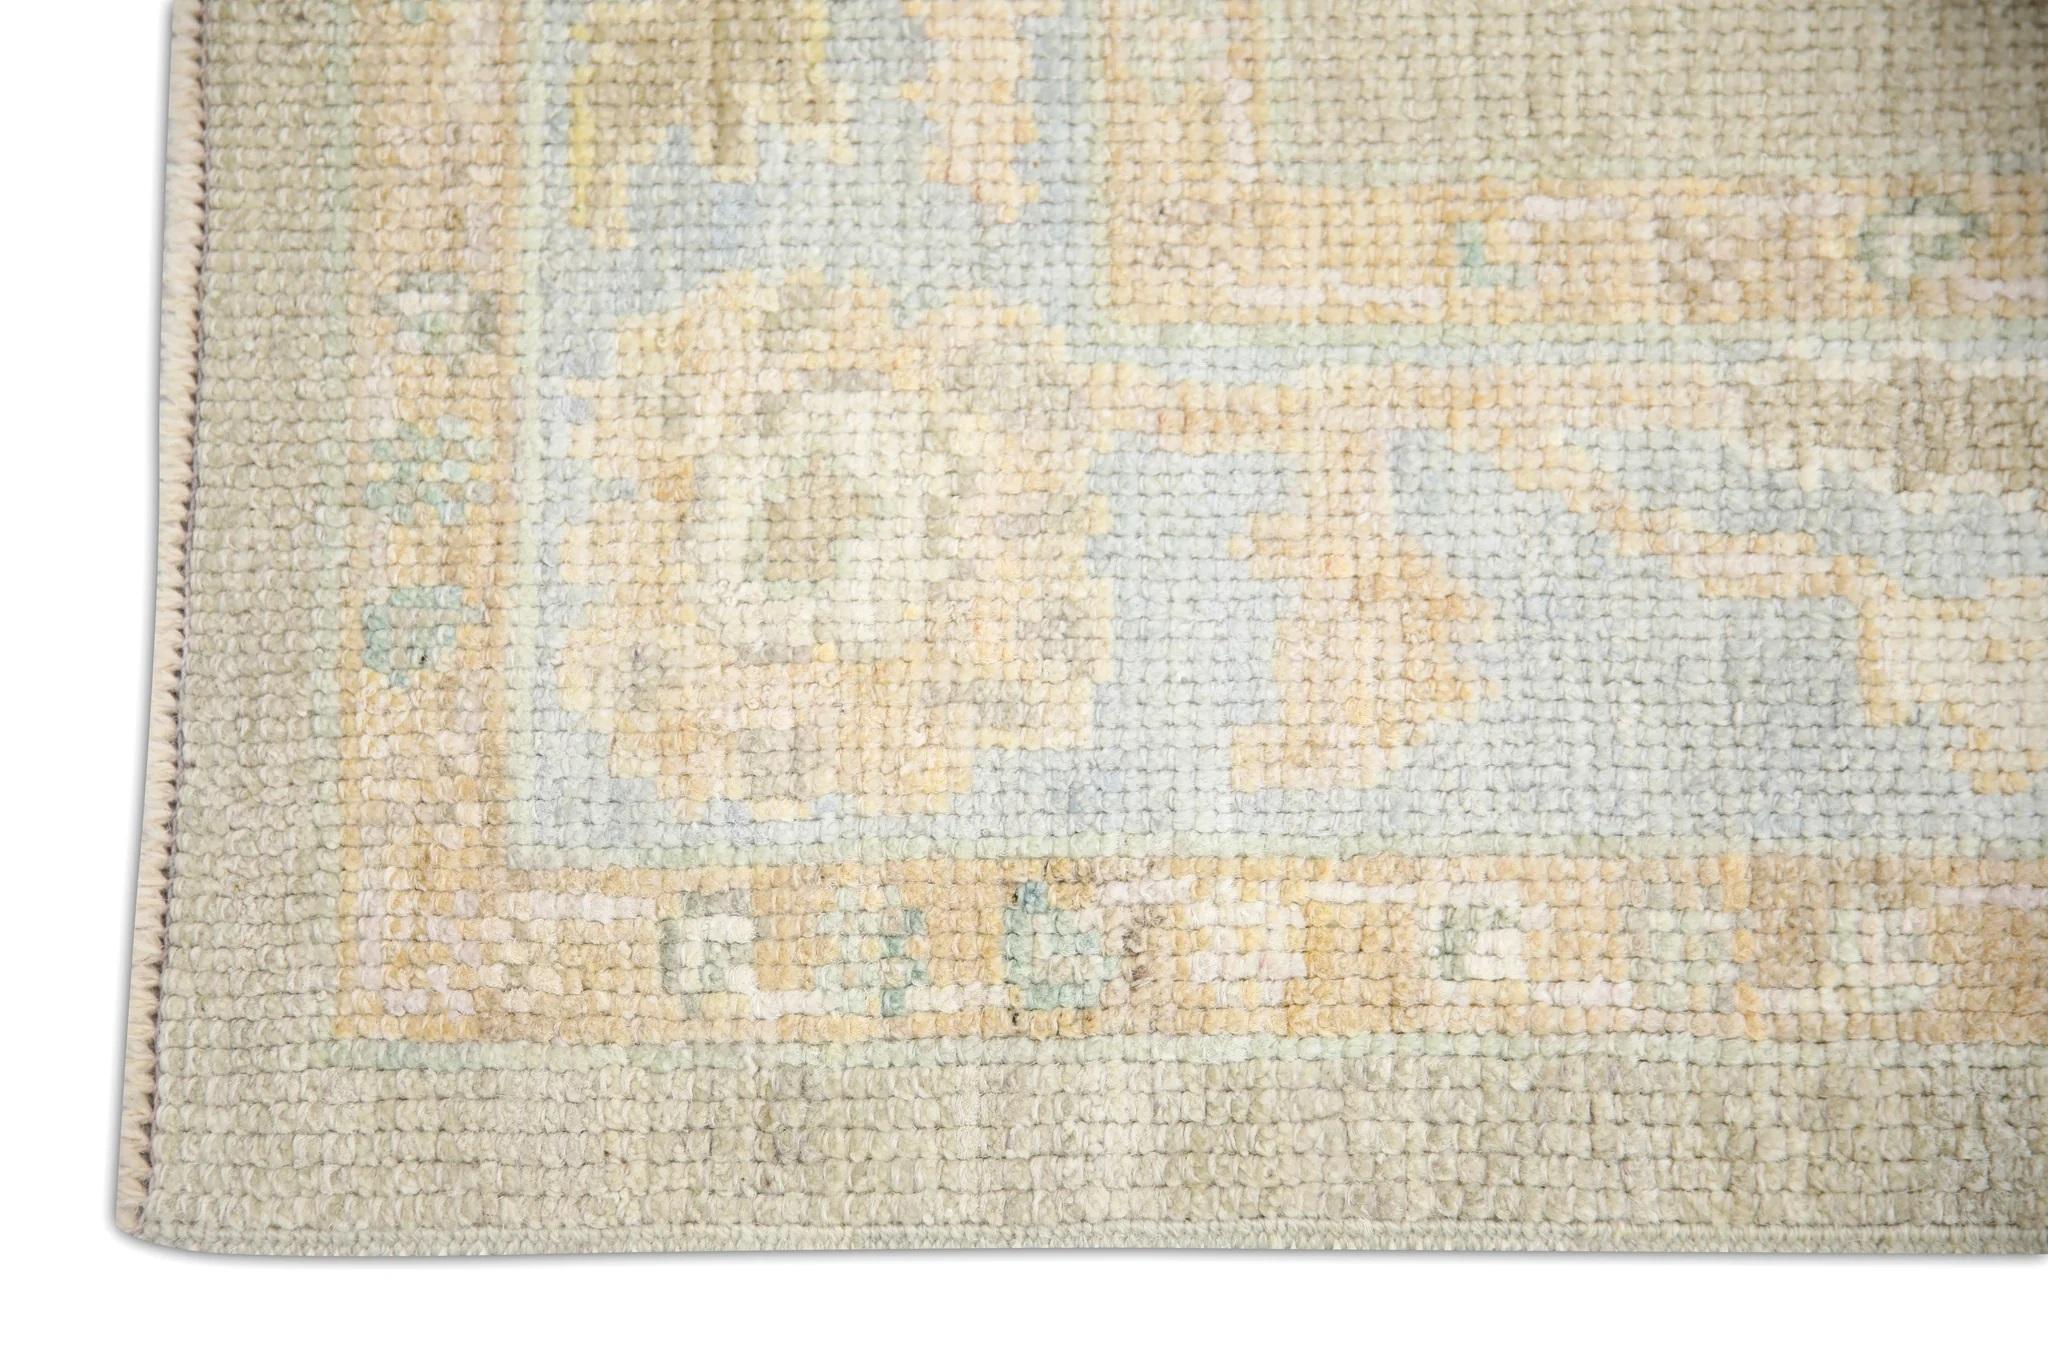 Modern Brown and Blue Floral Design Handwoven Wool Turkish Oushak Rug 3' x 5'5